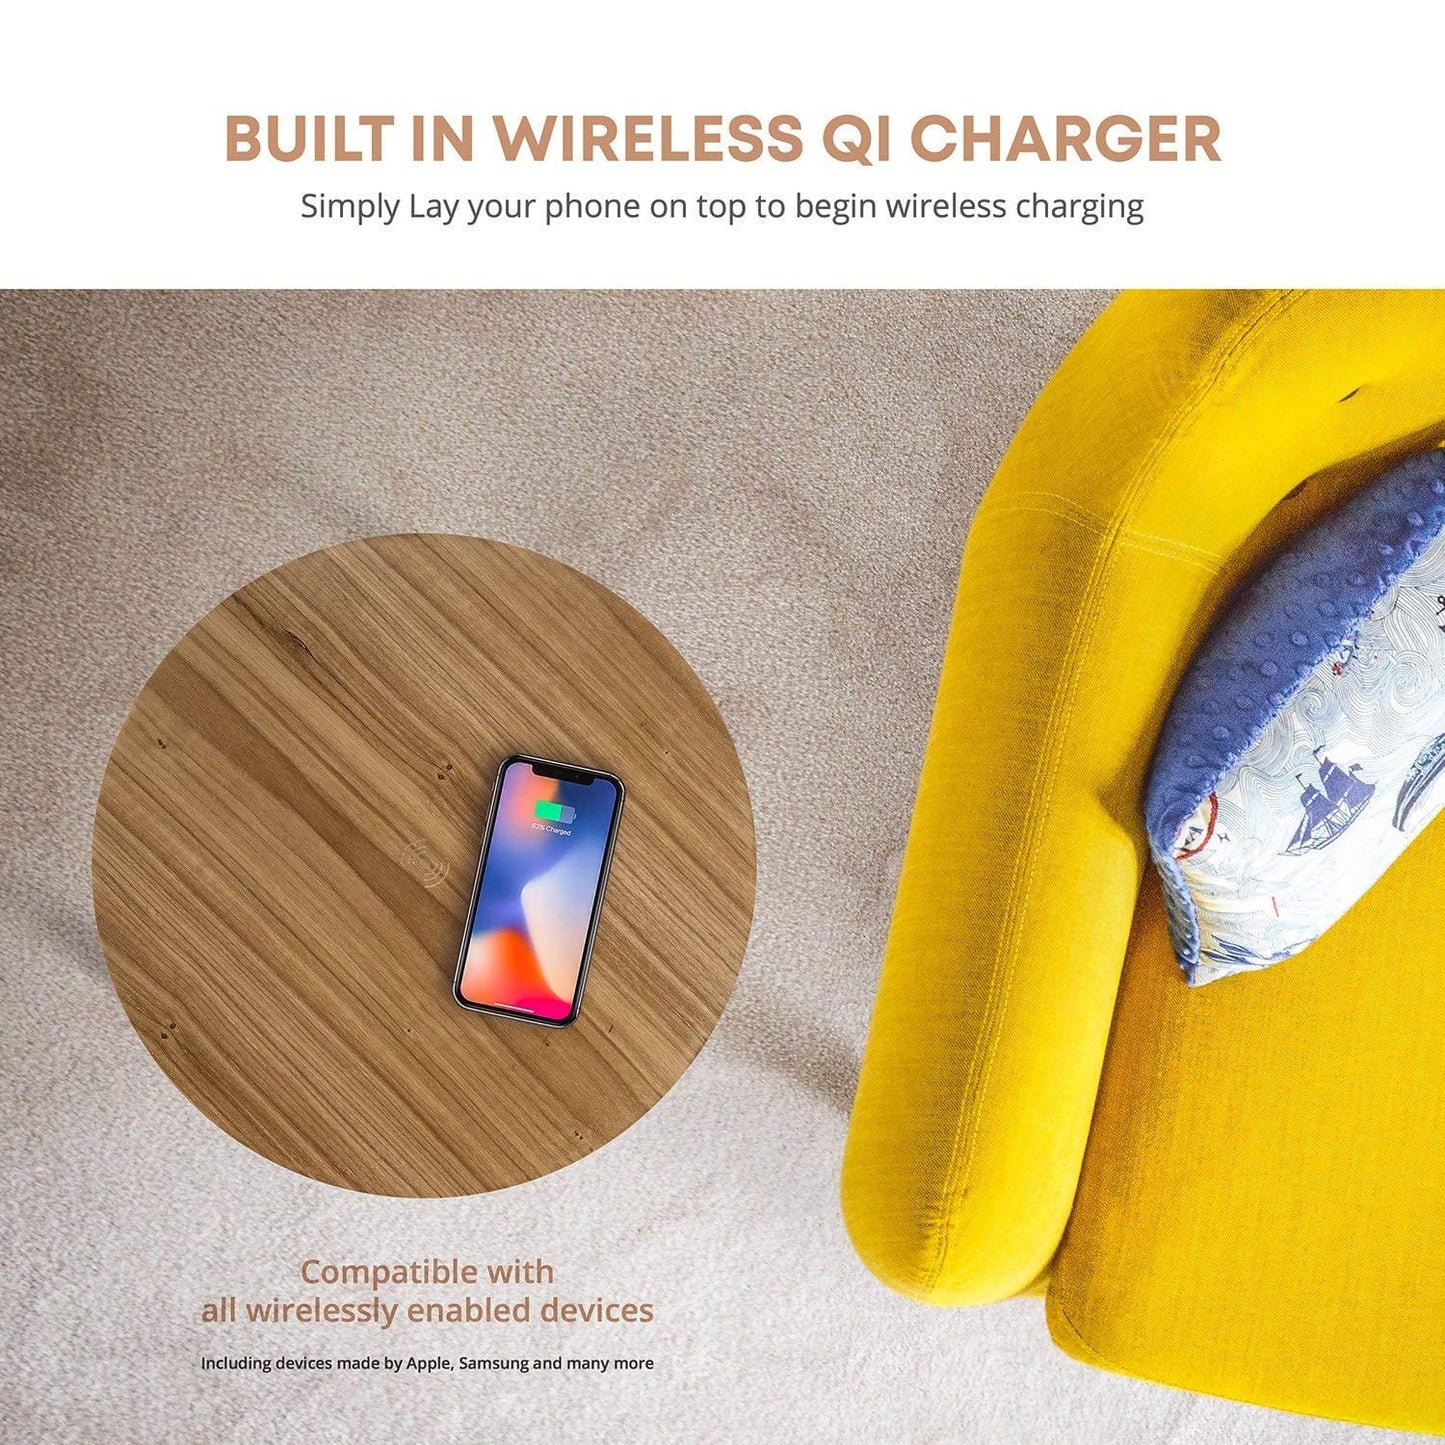 Bluetooth wireless charger tableMultifunctional Coffee Table Wireless Charging Bluetooth Speaker Smart Table 360 Home Bluetooth Loudspeaker